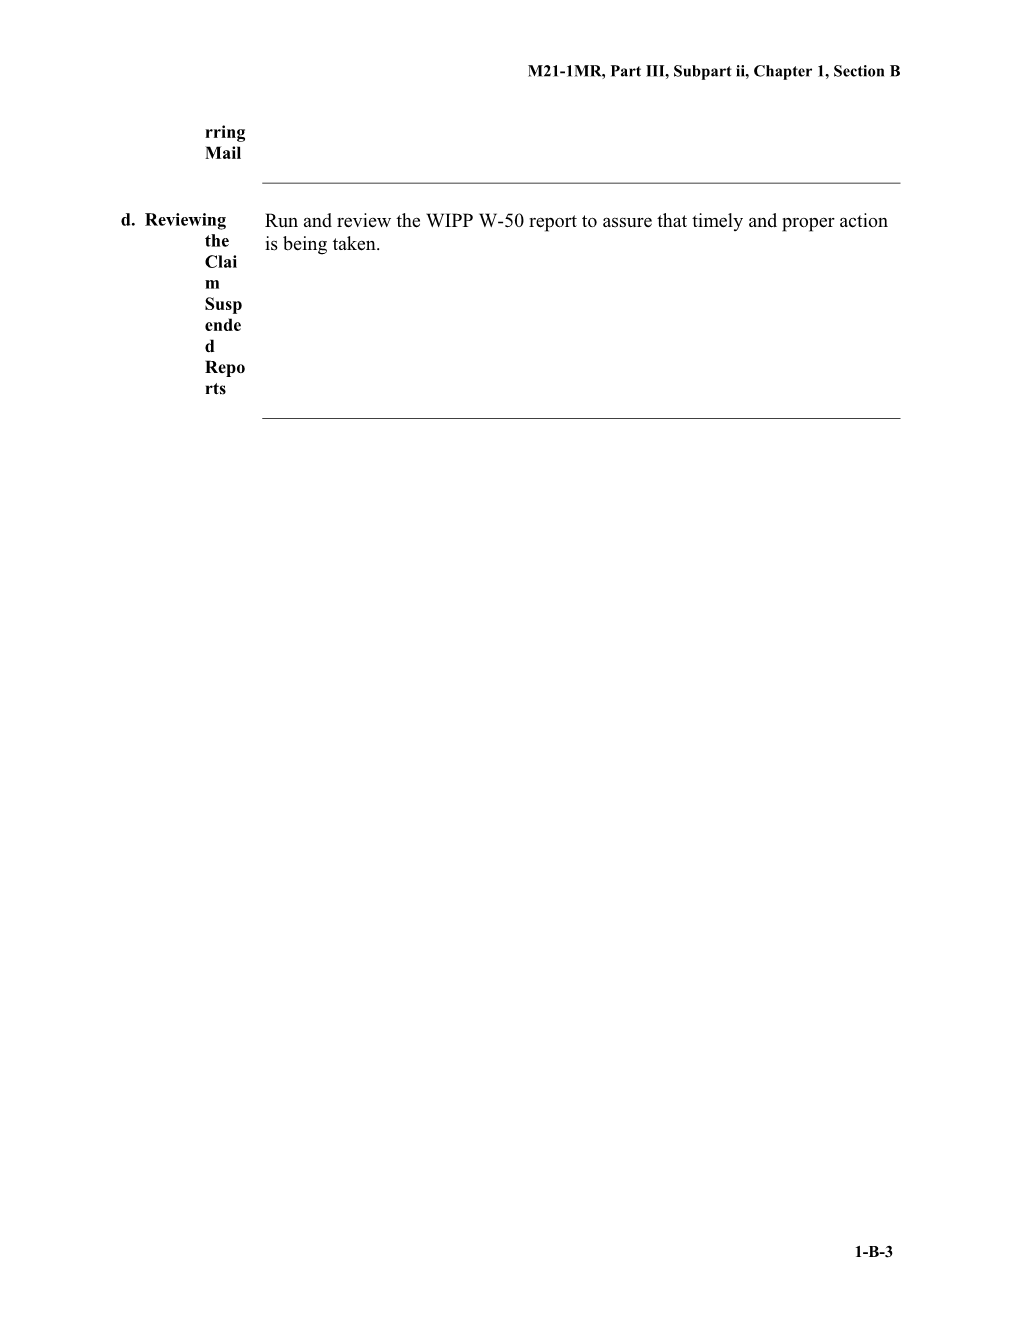 M21-1MR, Part III, Subpart Ii, Chapter 1, Section B. Mail Management